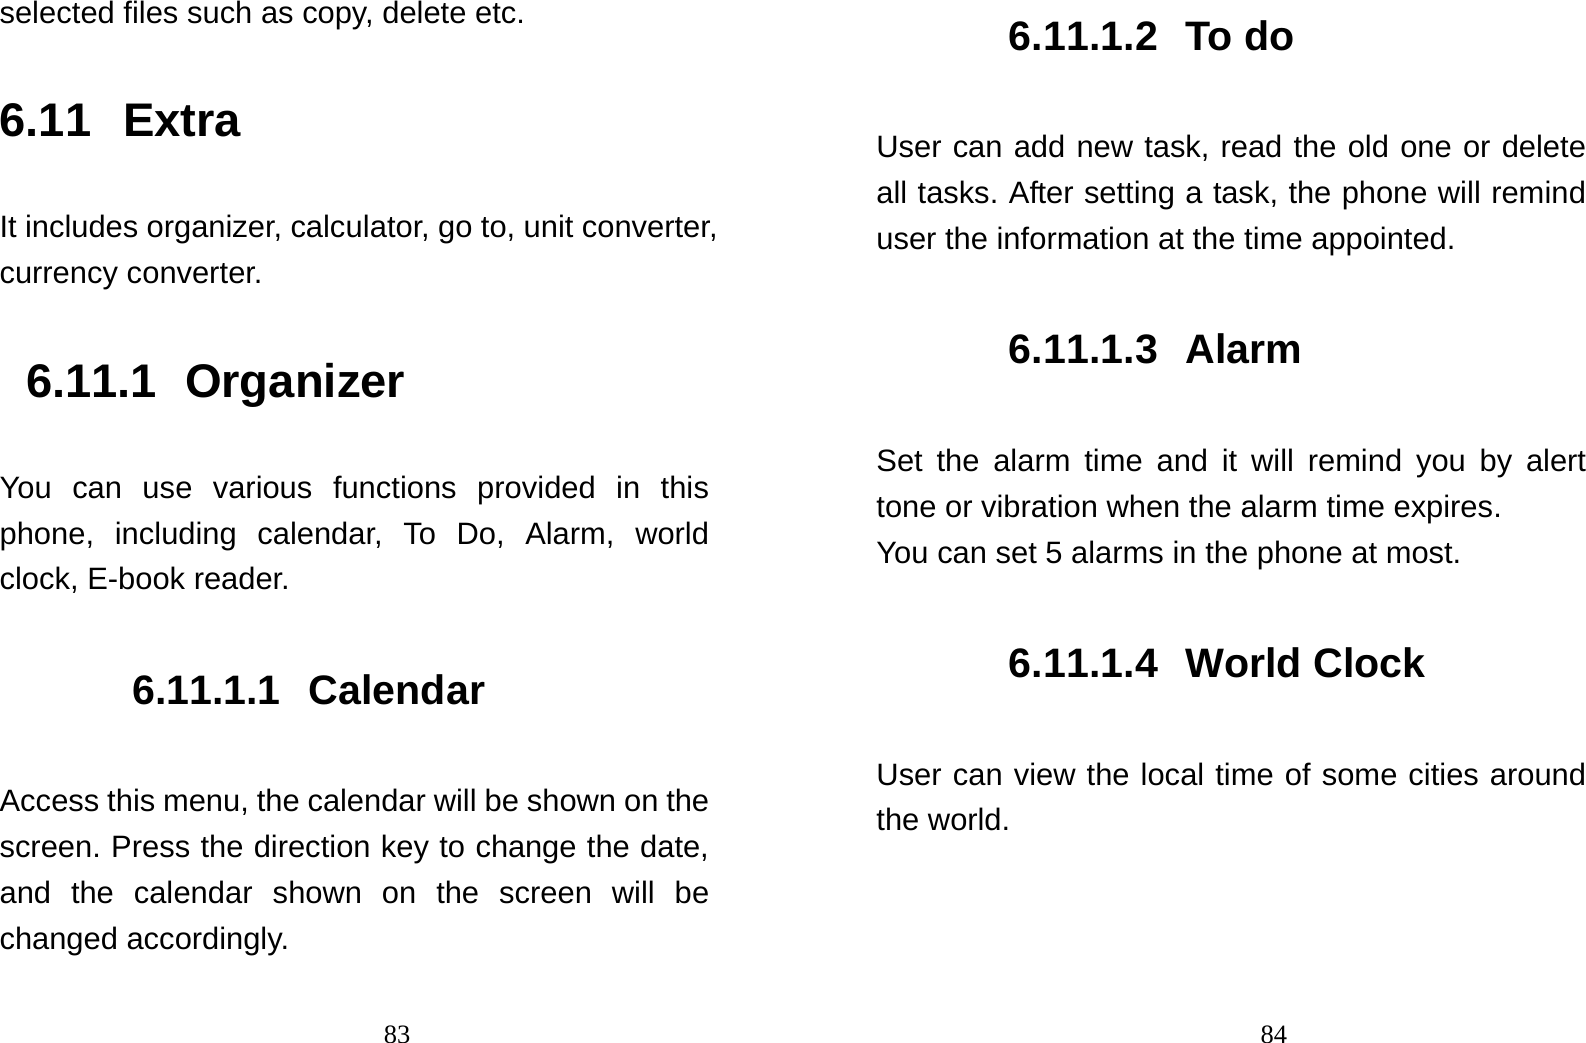                                83selected files such as copy, delete etc. 6.11 Extra It includes organizer, calculator, go to, unit converter, currency converter. 6.11.1 Organizer You can use various functions provided in this phone, including calendar, To Do, Alarm, world clock, E-book reader. 6.11.1.1 Calendar Access this menu, the calendar will be shown on the screen. Press the direction key to change the date, and the calendar shown on the screen will be changed accordingly.                                846.11.1.2 To do  User can add new task, read the old one or delete all tasks. After setting a task, the phone will remind user the information at the time appointed. 6.11.1.3 Alarm Set the alarm time and it will remind you by alert tone or vibration when the alarm time expires. You can set 5 alarms in the phone at most.   6.11.1.4 World Clock User can view the local time of some cities around the world. 